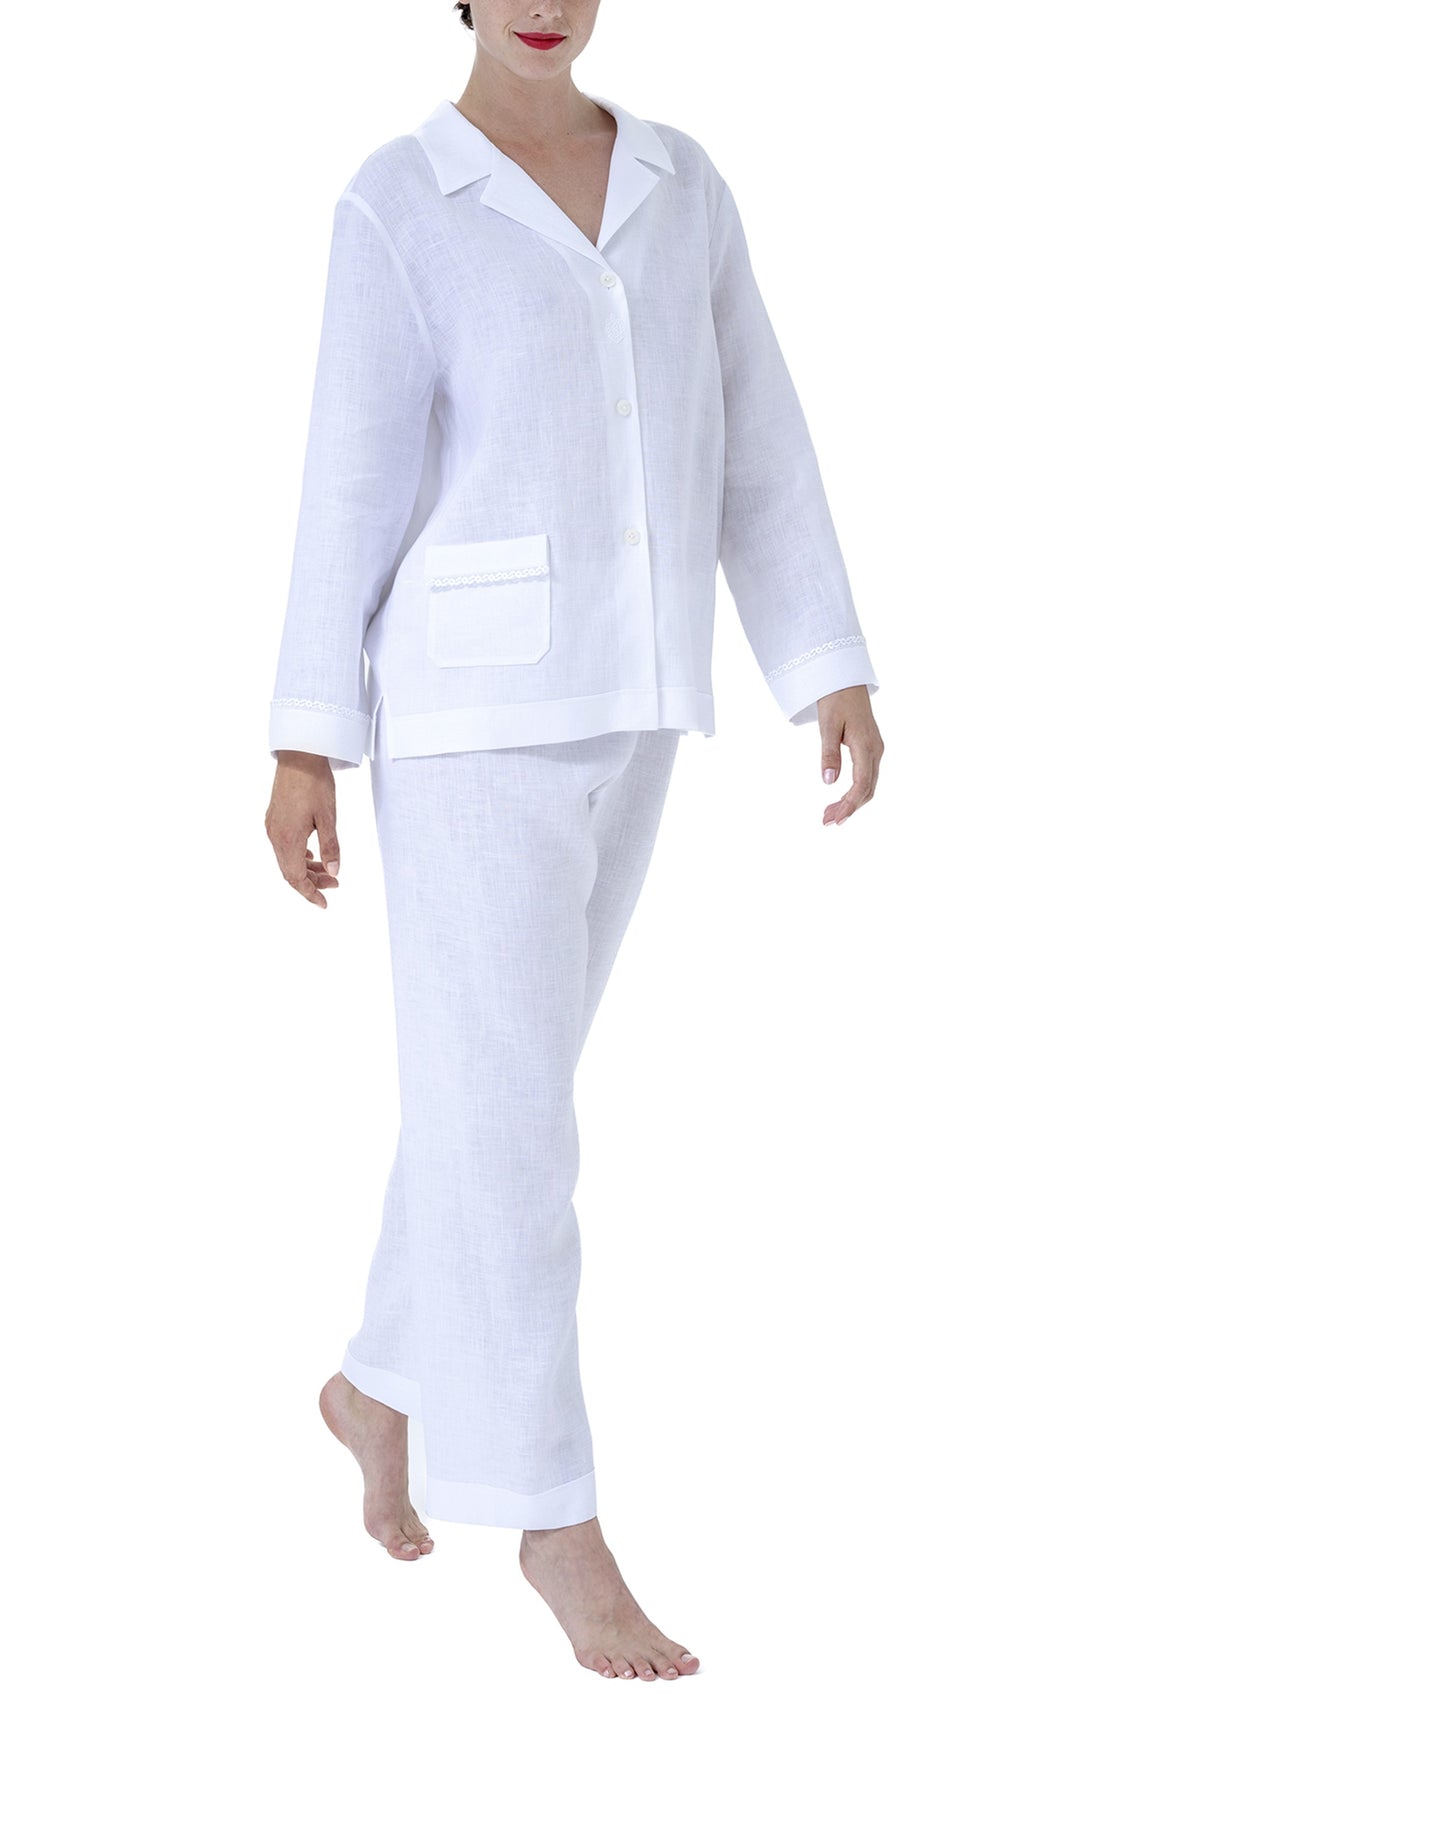 Classic 100% Pre-washed Linen Pyjamas. Revere collar on loose jacket. The pocket on the hip has a feminine lace trim. Full length trousers with a gentle elasticated waist.  Celestine garments are also addictive, so watch out. Once tried, there is no turning back!  Celestine nightwear, dressing gowns, short robes and pyjamas drop from the shoulder, therefore one size fits all.  Composition: 100% Linen 100% Guipure Lace Machine Washable